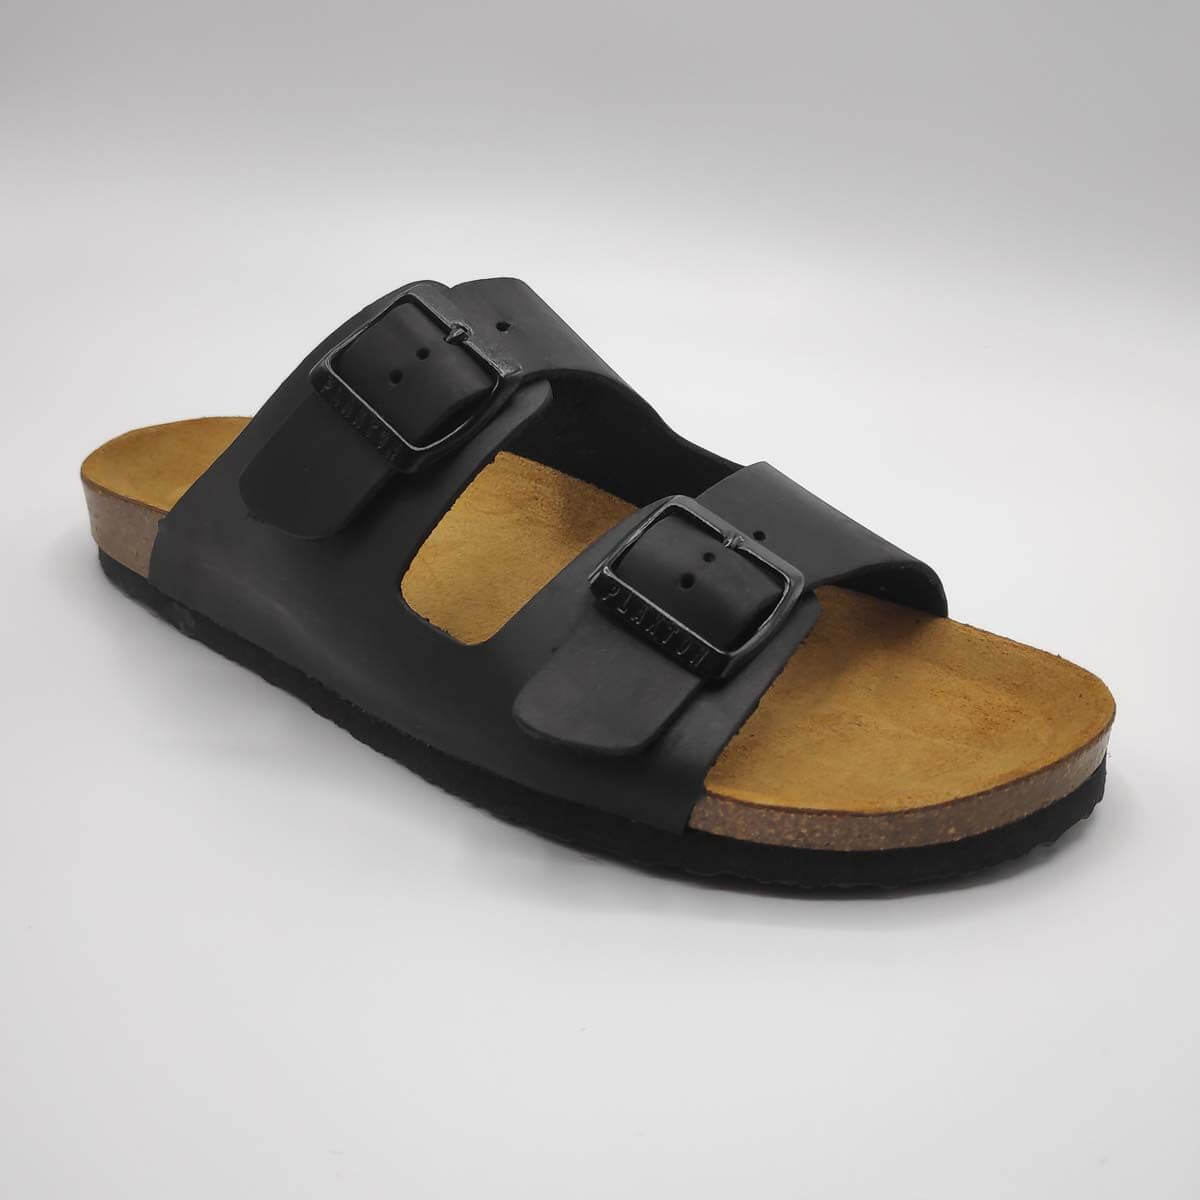 sandals with two straps and buckles